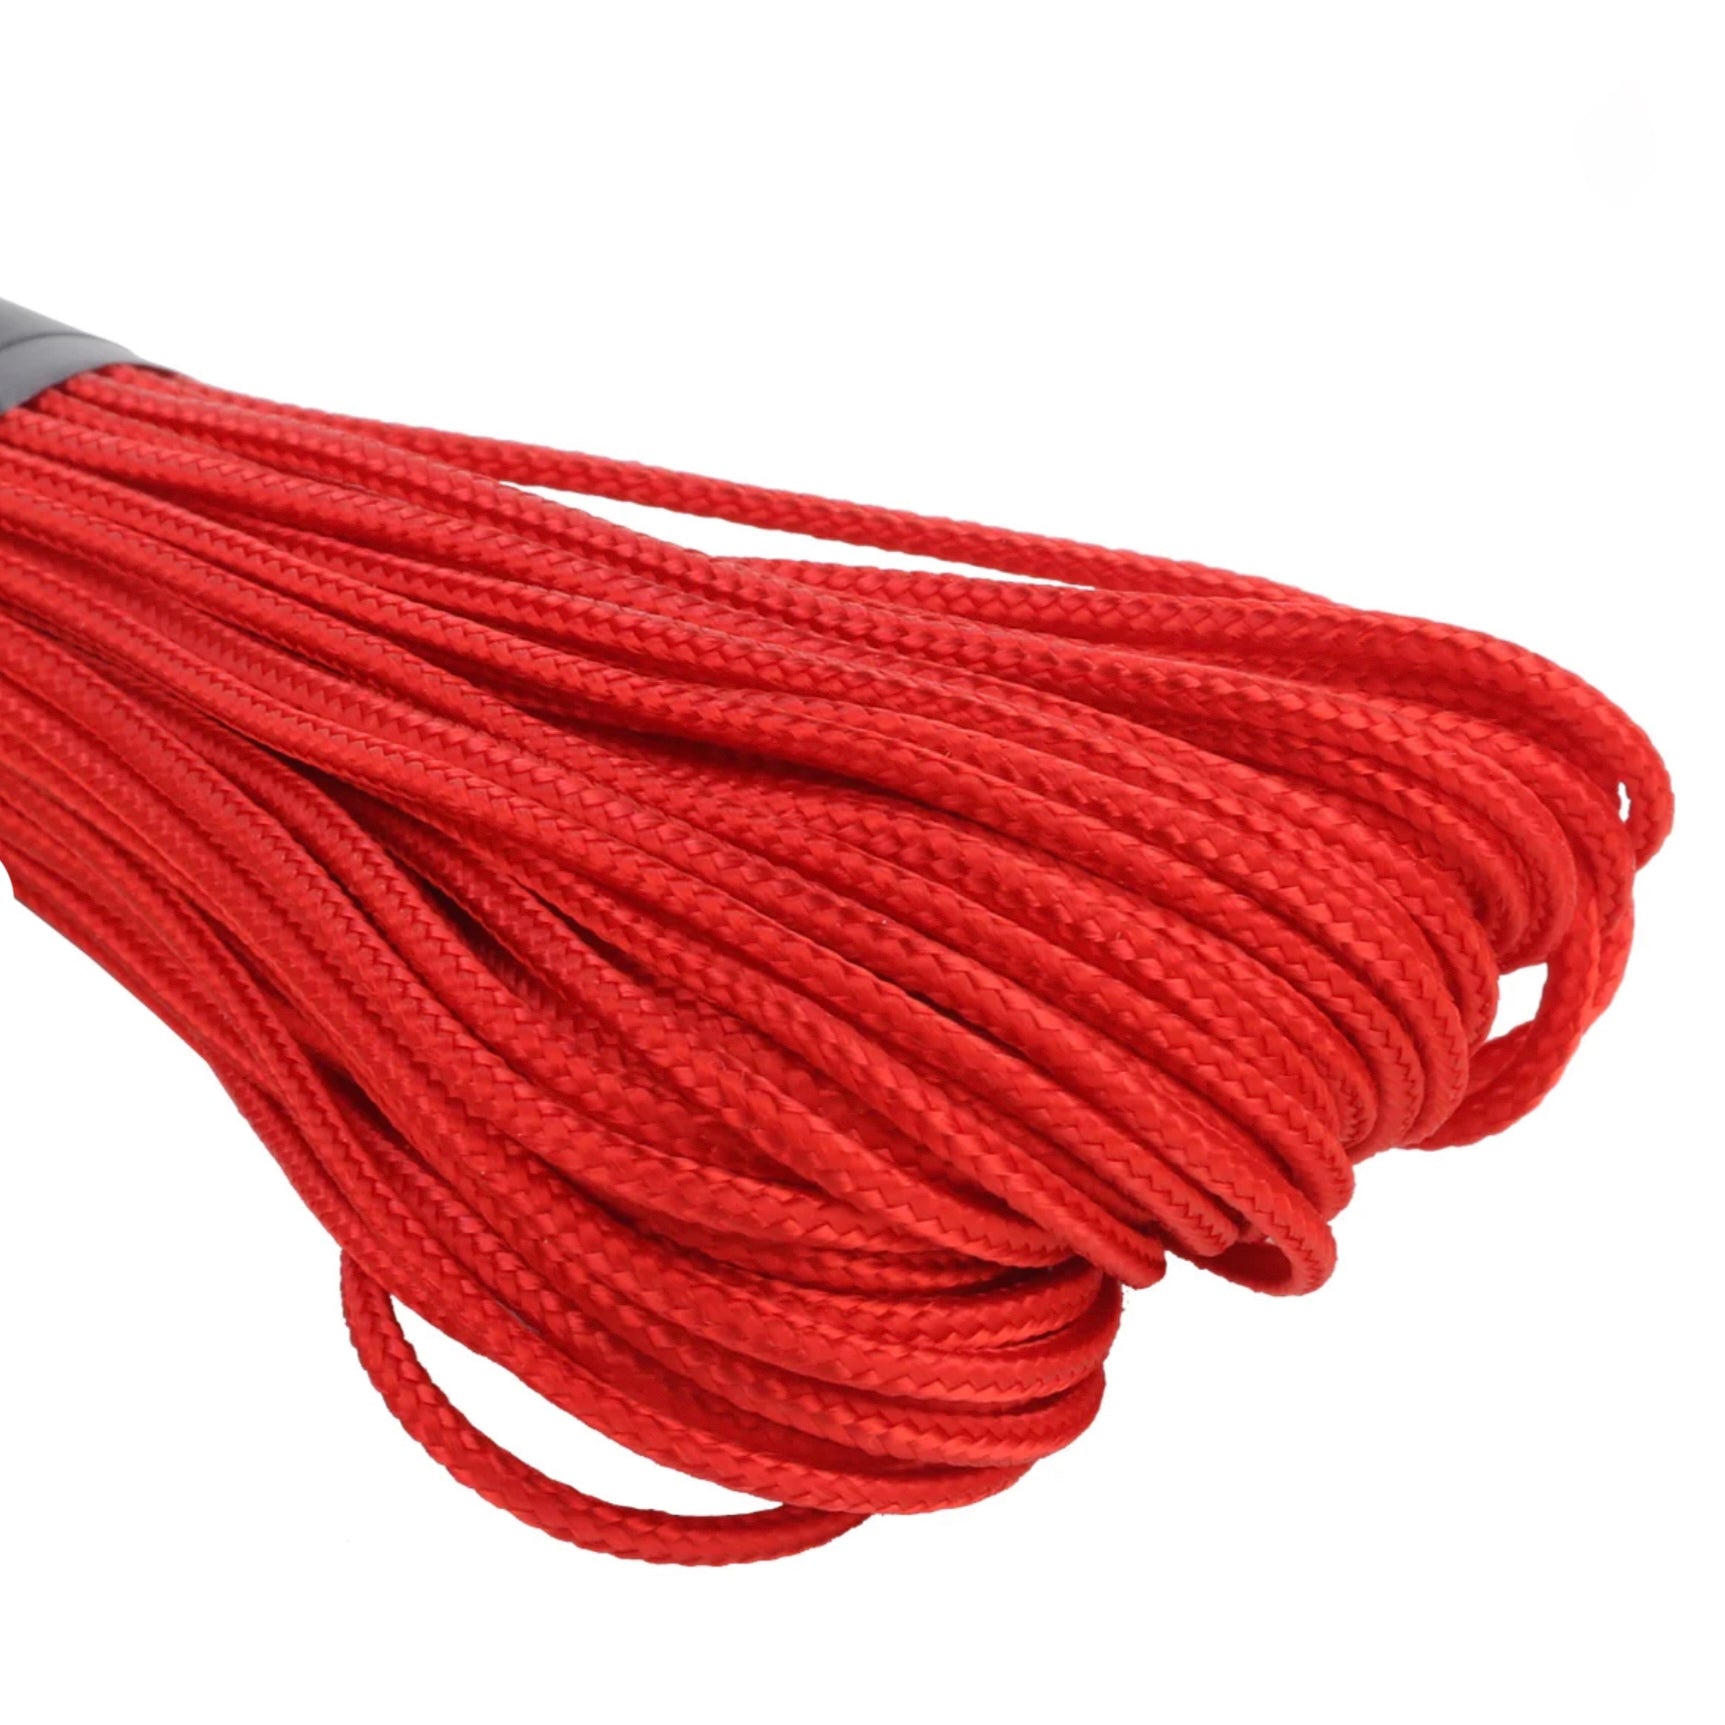 Atwood Paracord 95 1.75mm Red – Paracord New Zealand